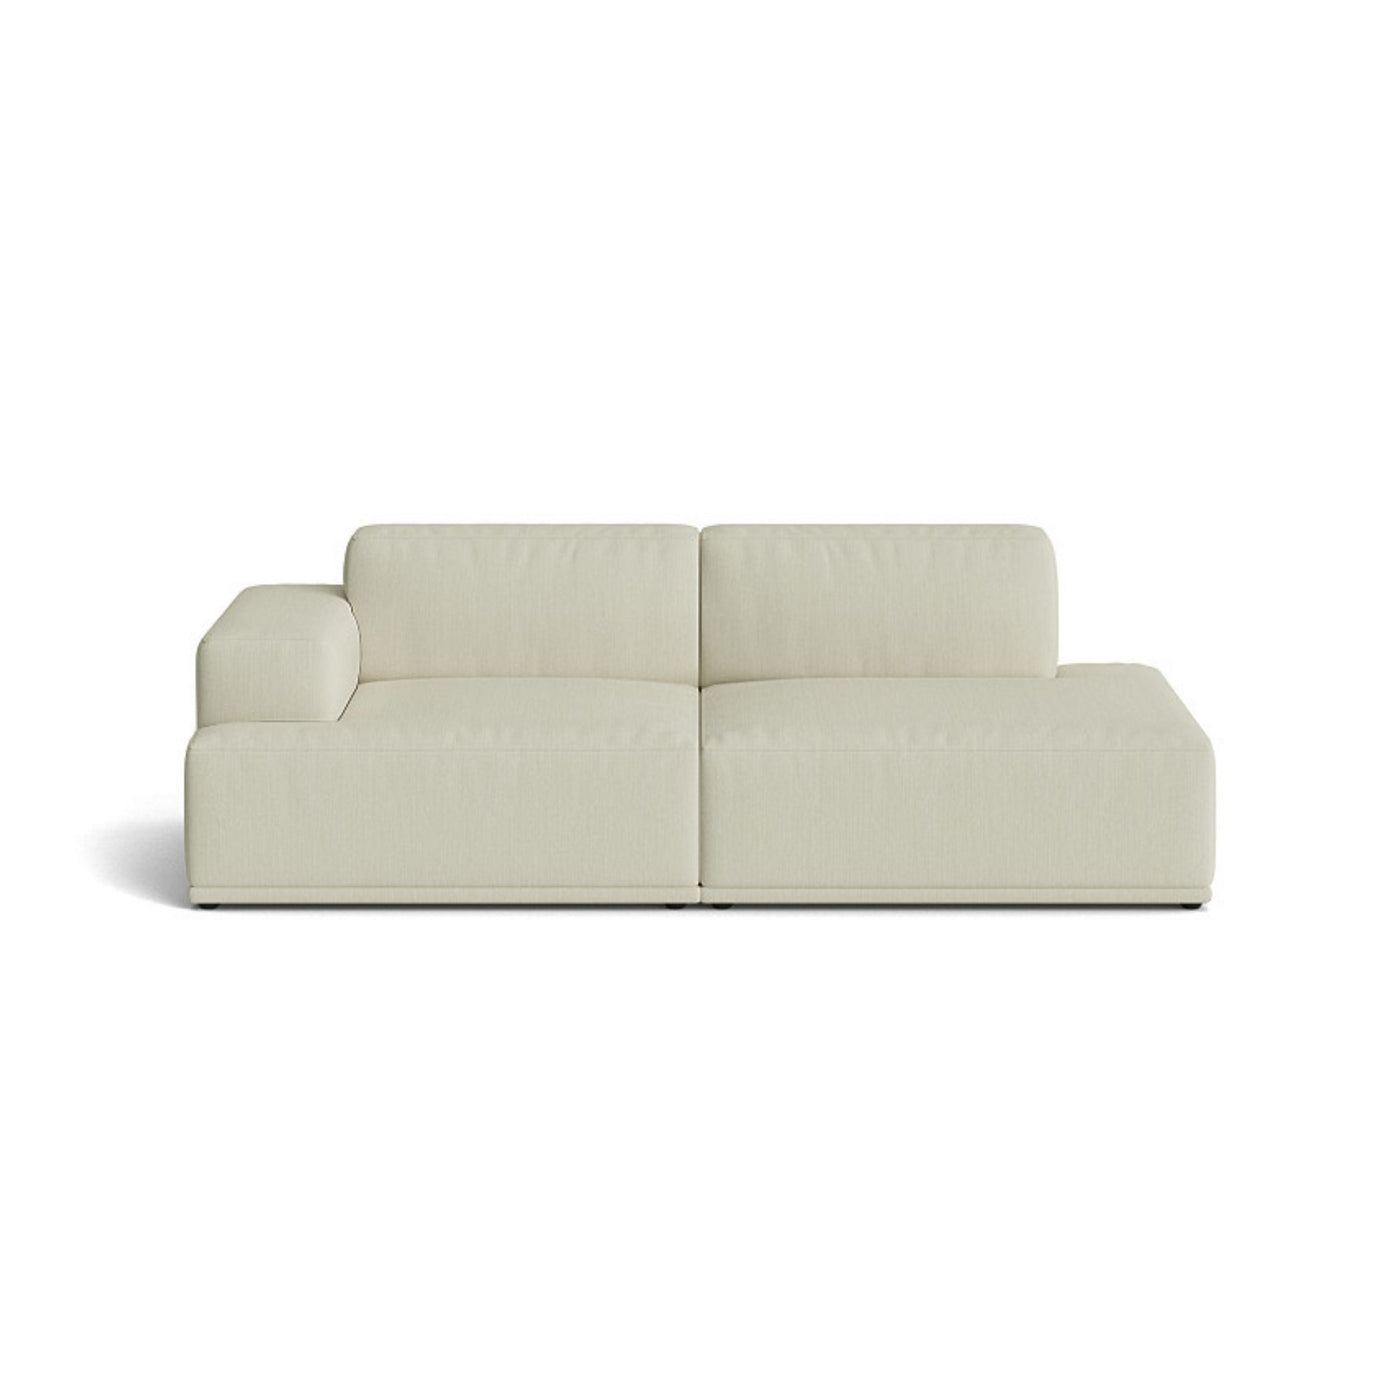 Muuto Connect Soft Modular 2 Seater Sofa, configuration 2. made-to-order from someday designs. #colour_balder-912